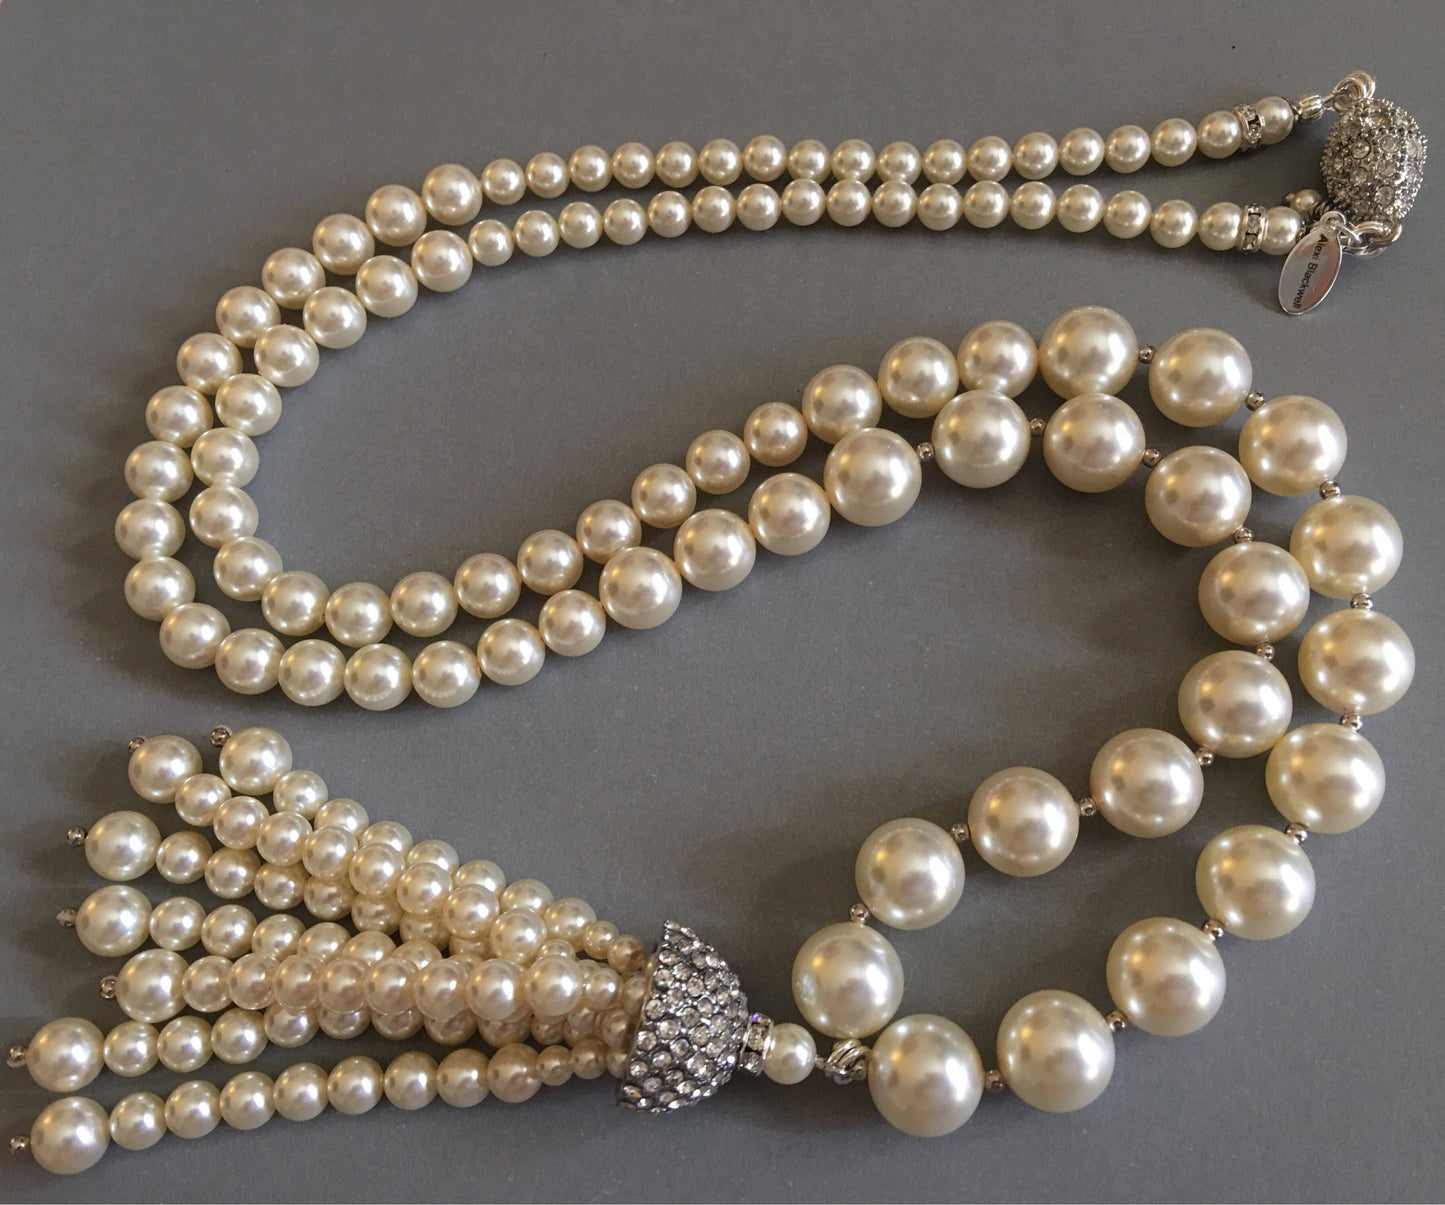 Long Pearl Necklace with Silver Rhinestone tassel Flapper Necklace graduated sizes Crystal pearls Cream Ivory Gifts for Her